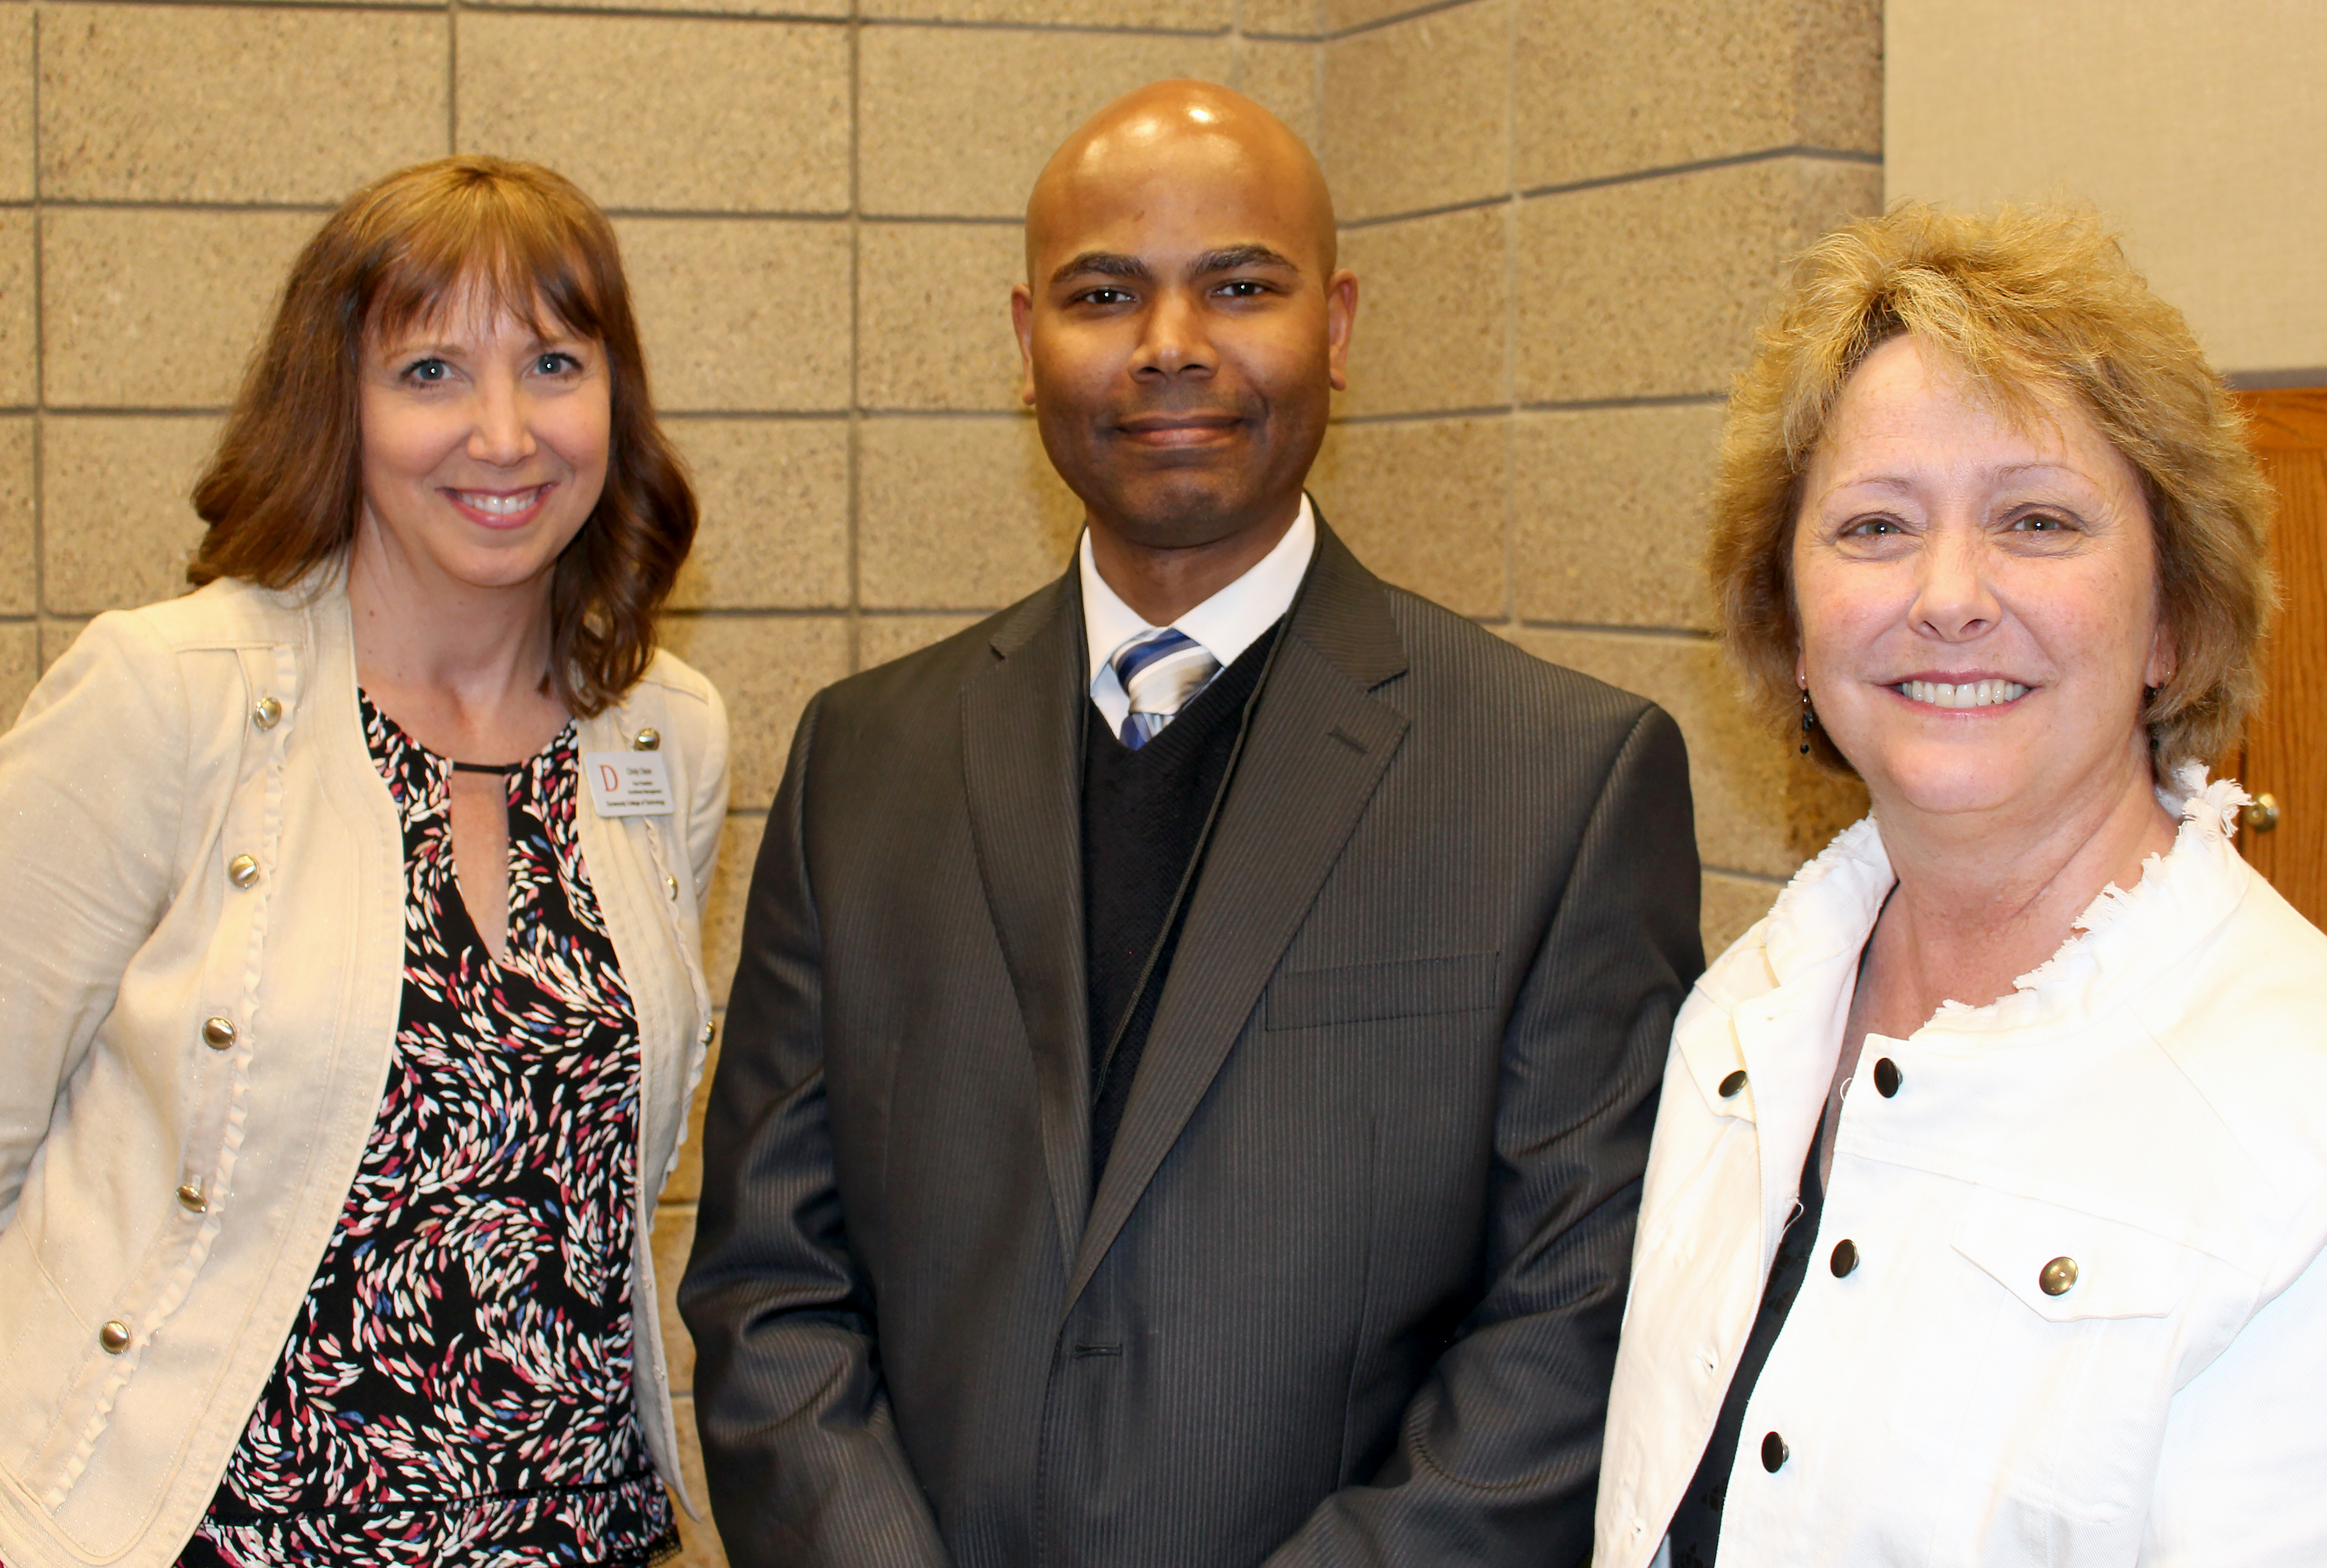 From left to right: Vice President of Enrollment Management Cindy Olson, Principal of Ascension Catholic School Benito Matias, and Associate Director of Special Initiatives Peggy Quam